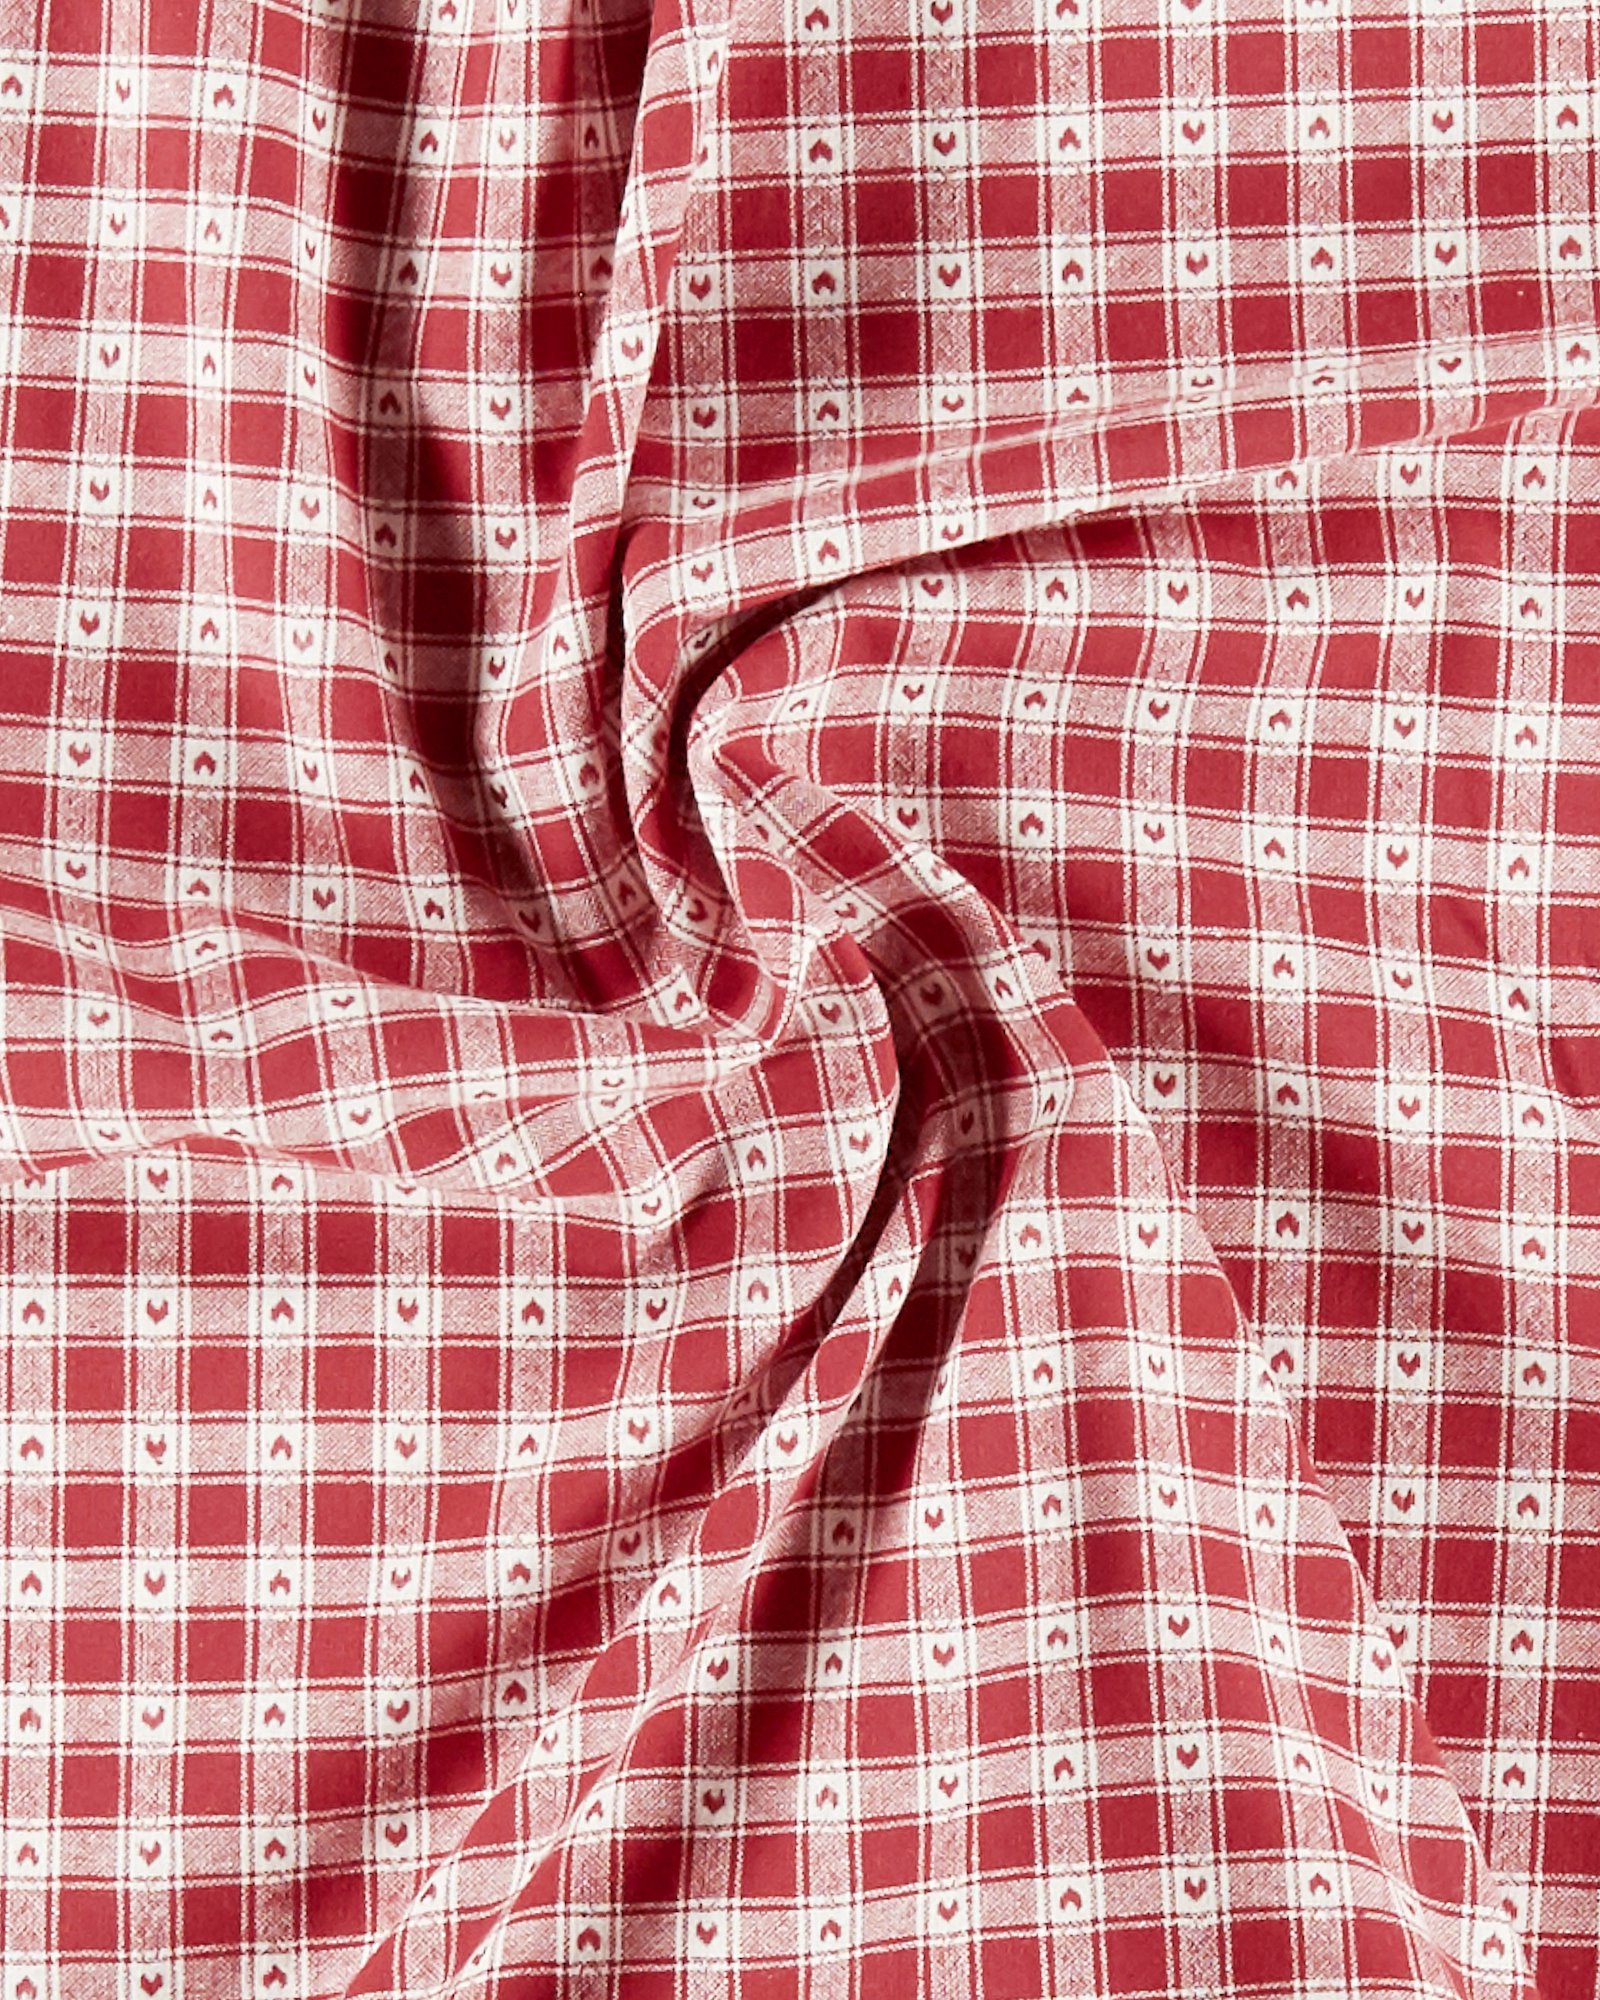 Woven cotton red/white YD check w hearts 816311_pack